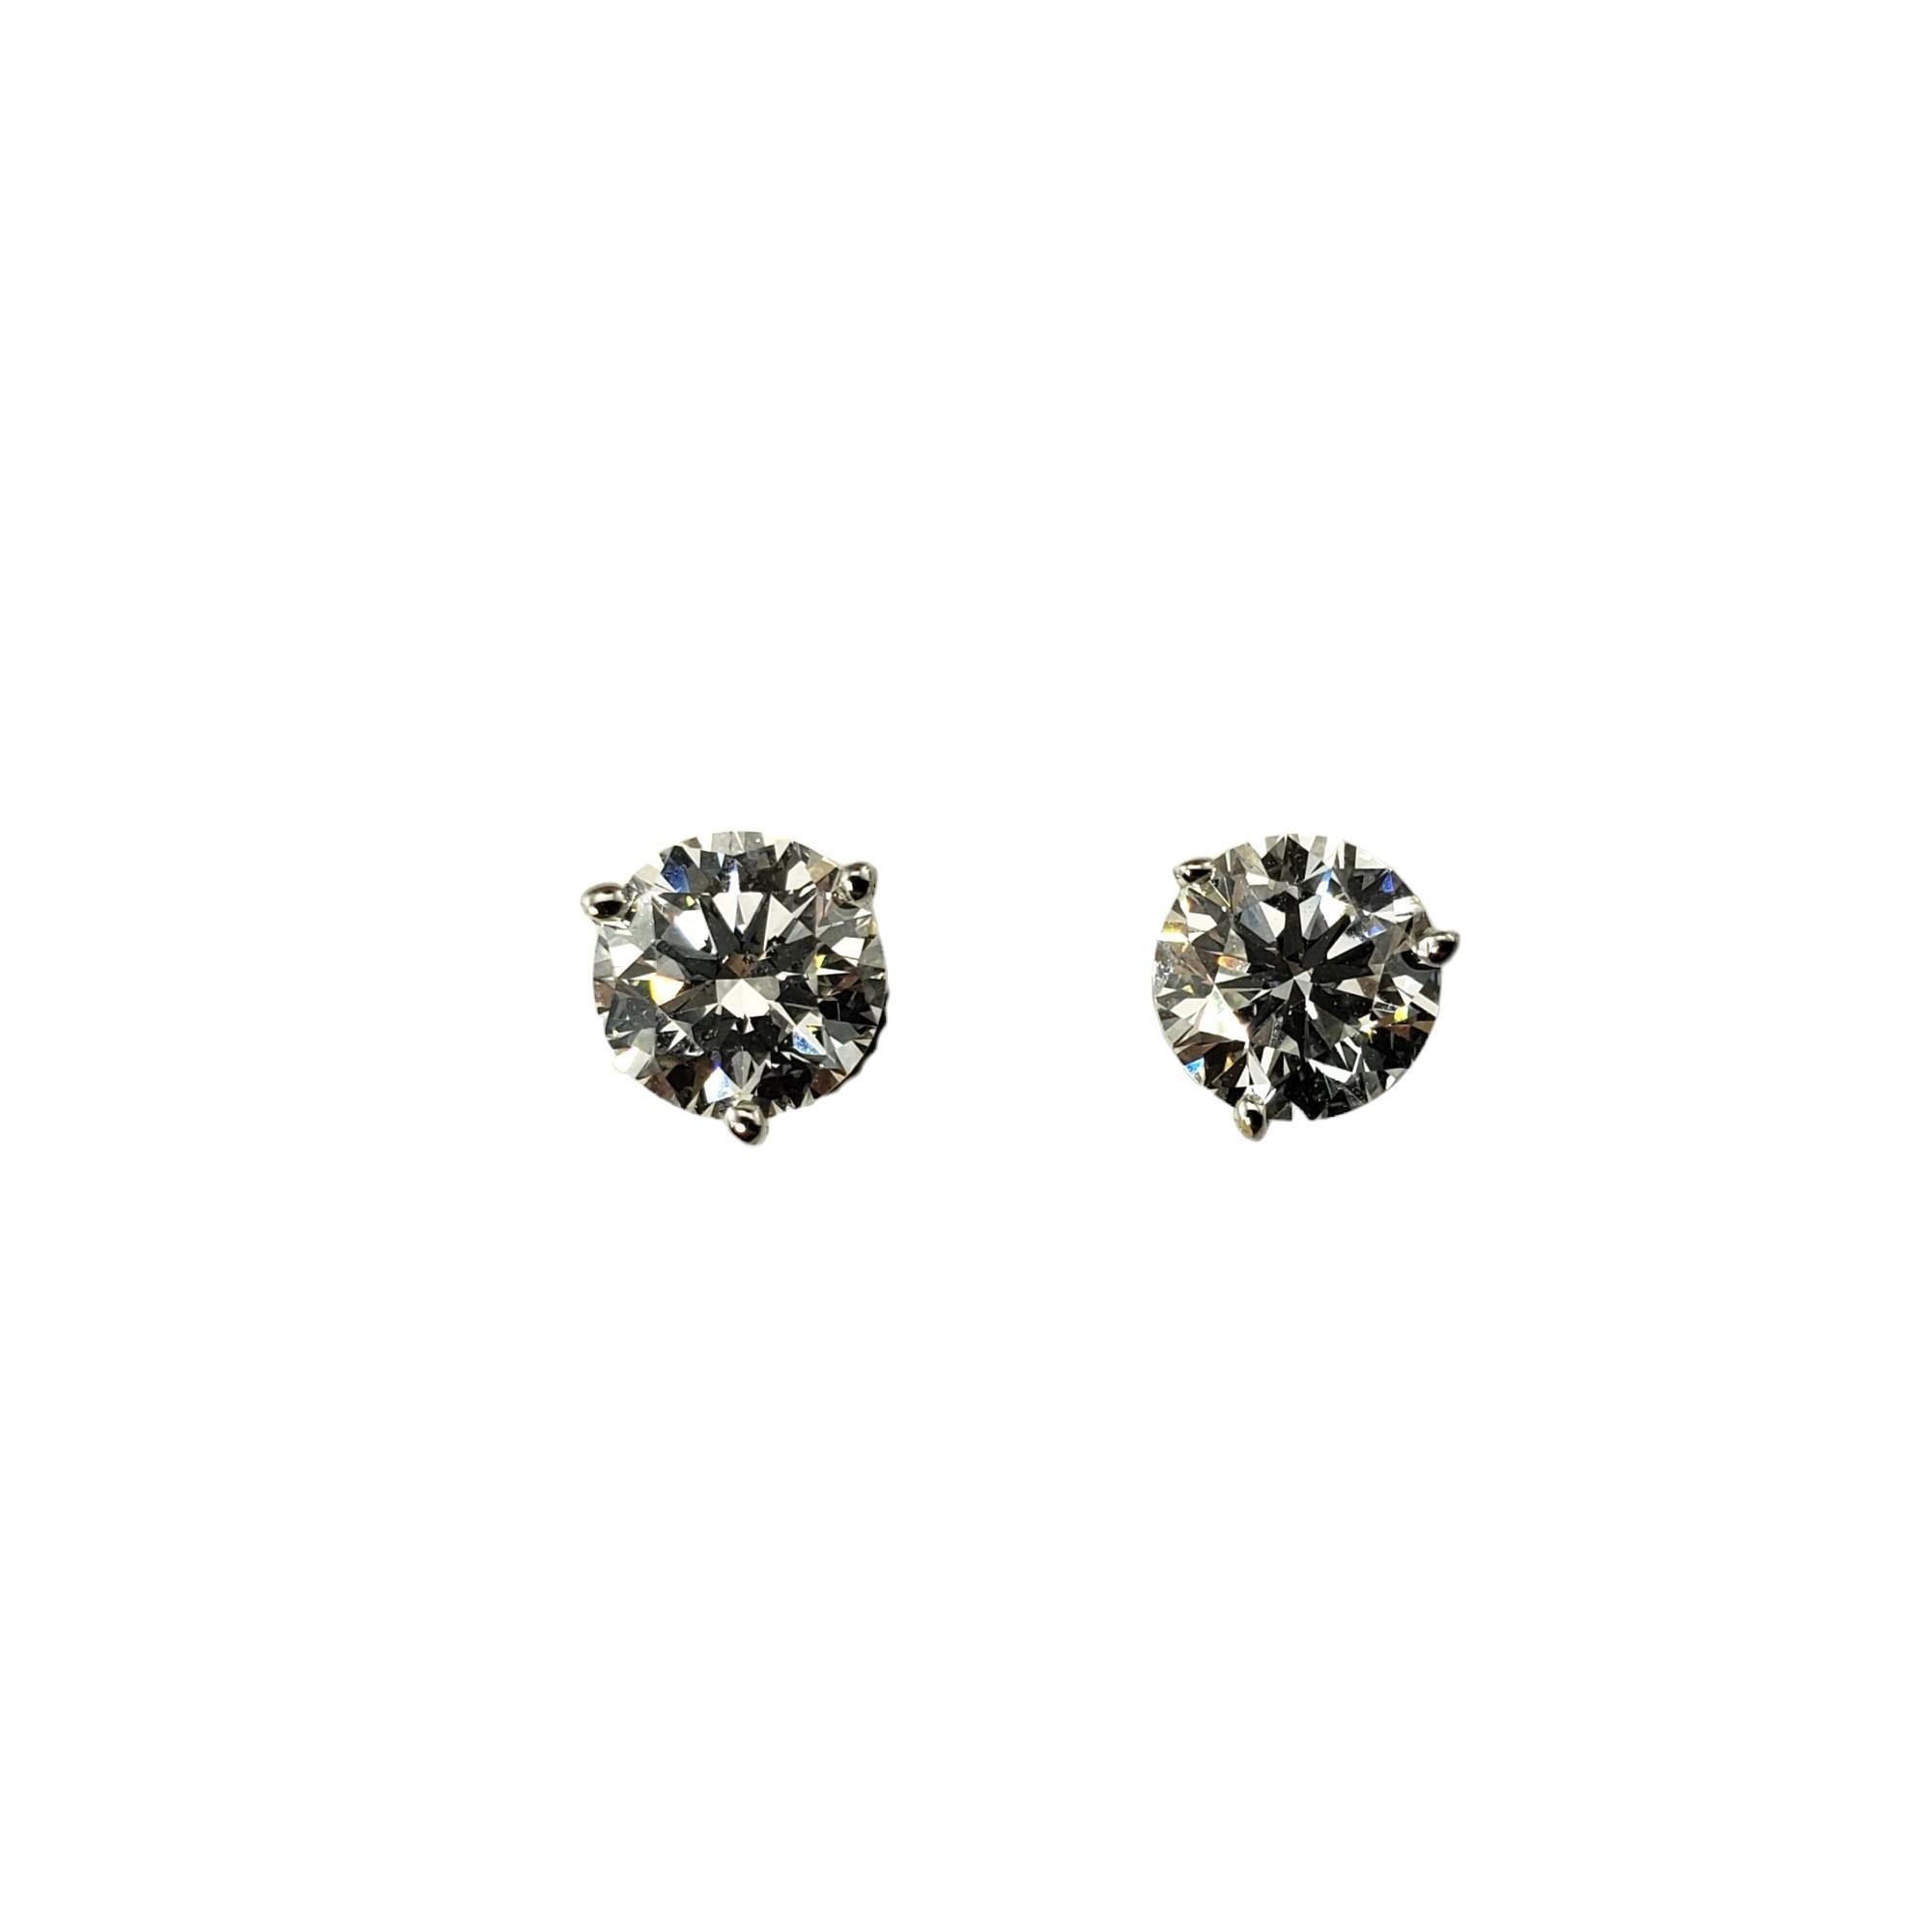 14 Karat White Gold Diamond Stud Earrings #15811 In Good Condition For Sale In Washington Depot, CT